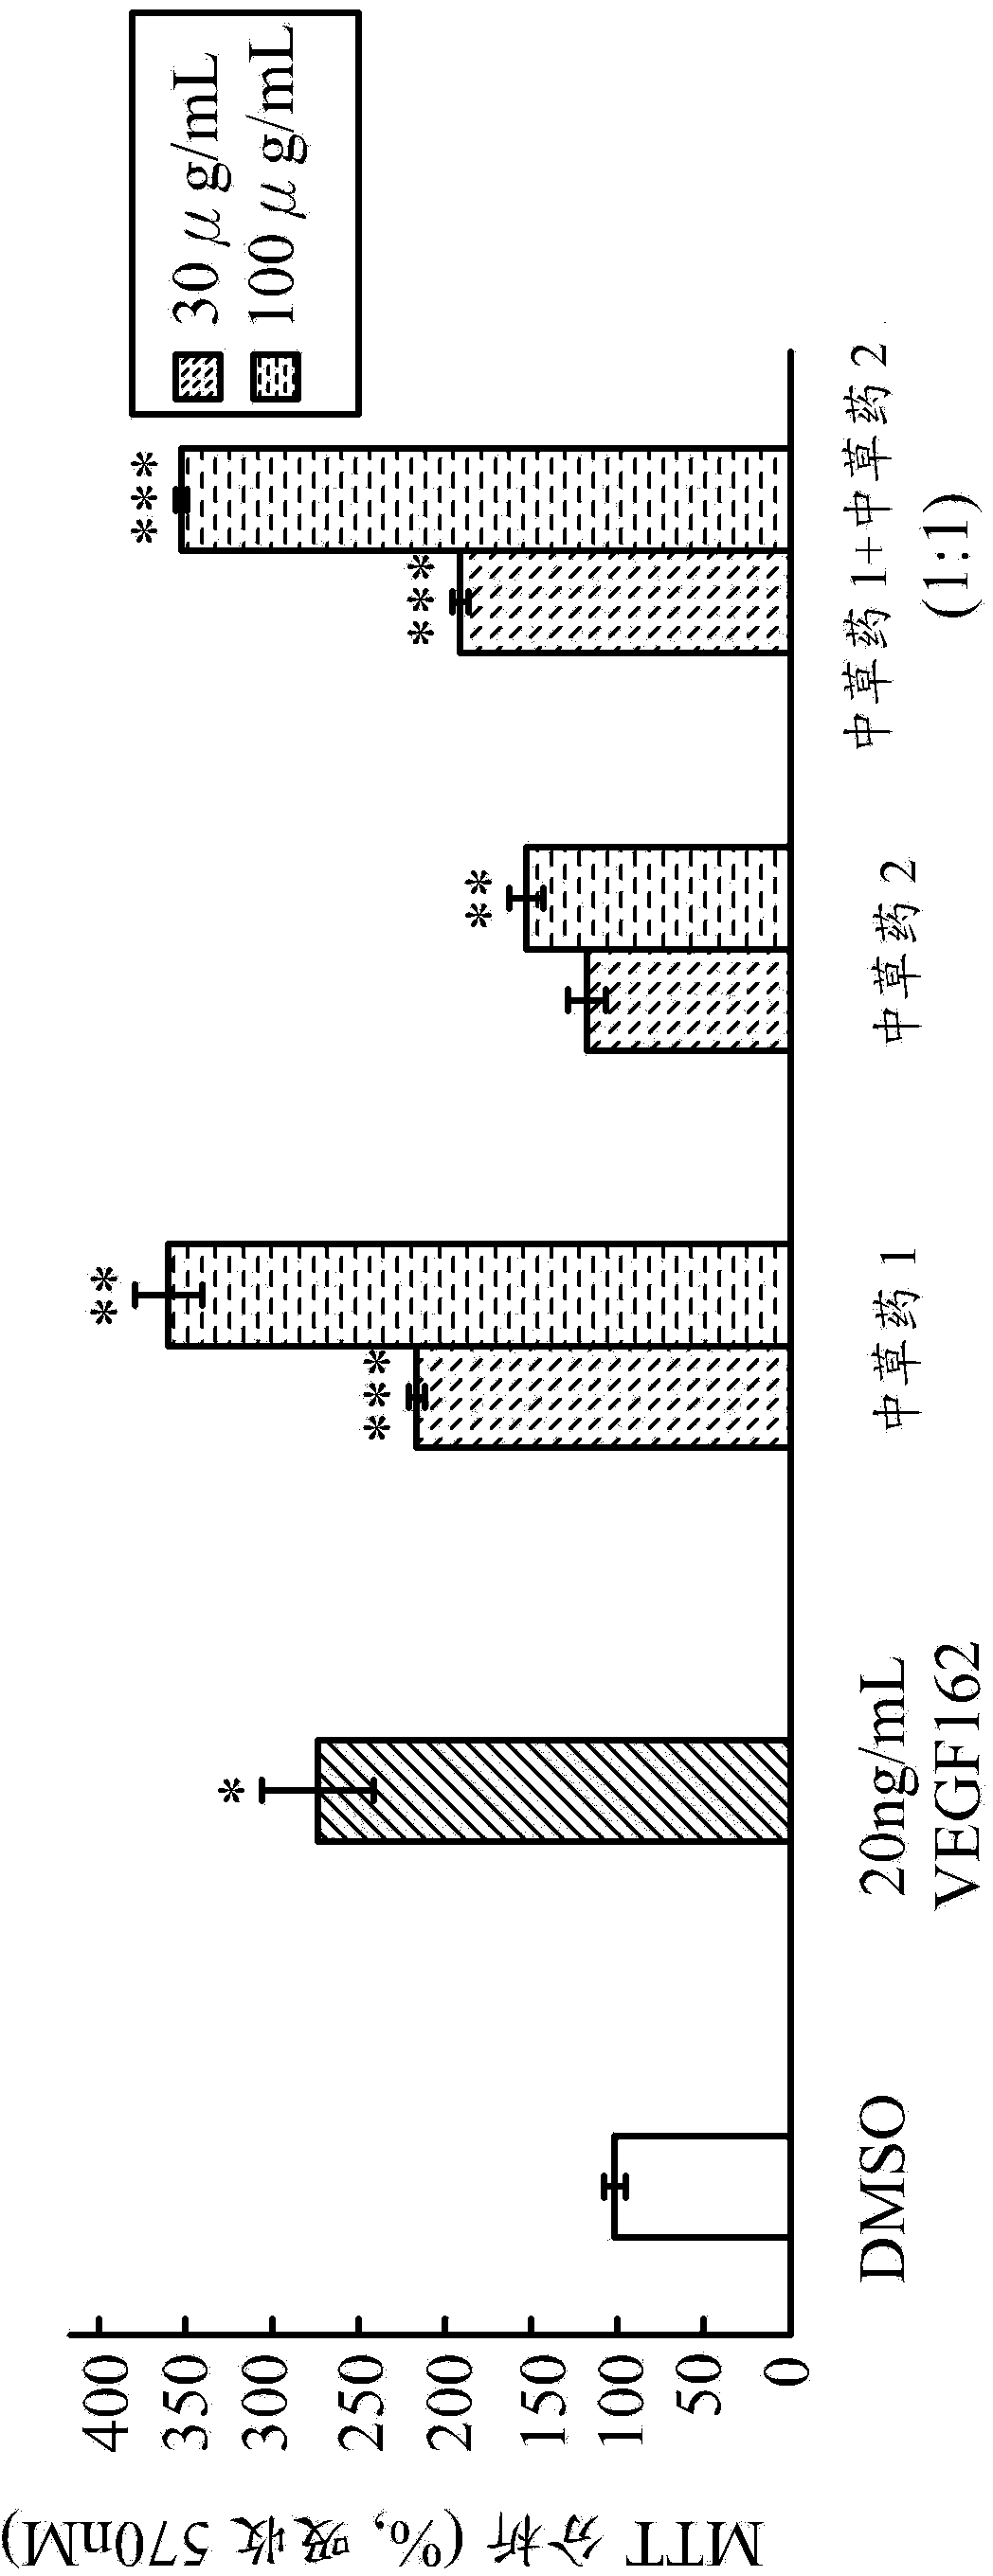 Pharmaceutical composition for promoting wound healing, and appliacations of sambucus plant or isatis plant for preparing medication for promoting wound healing